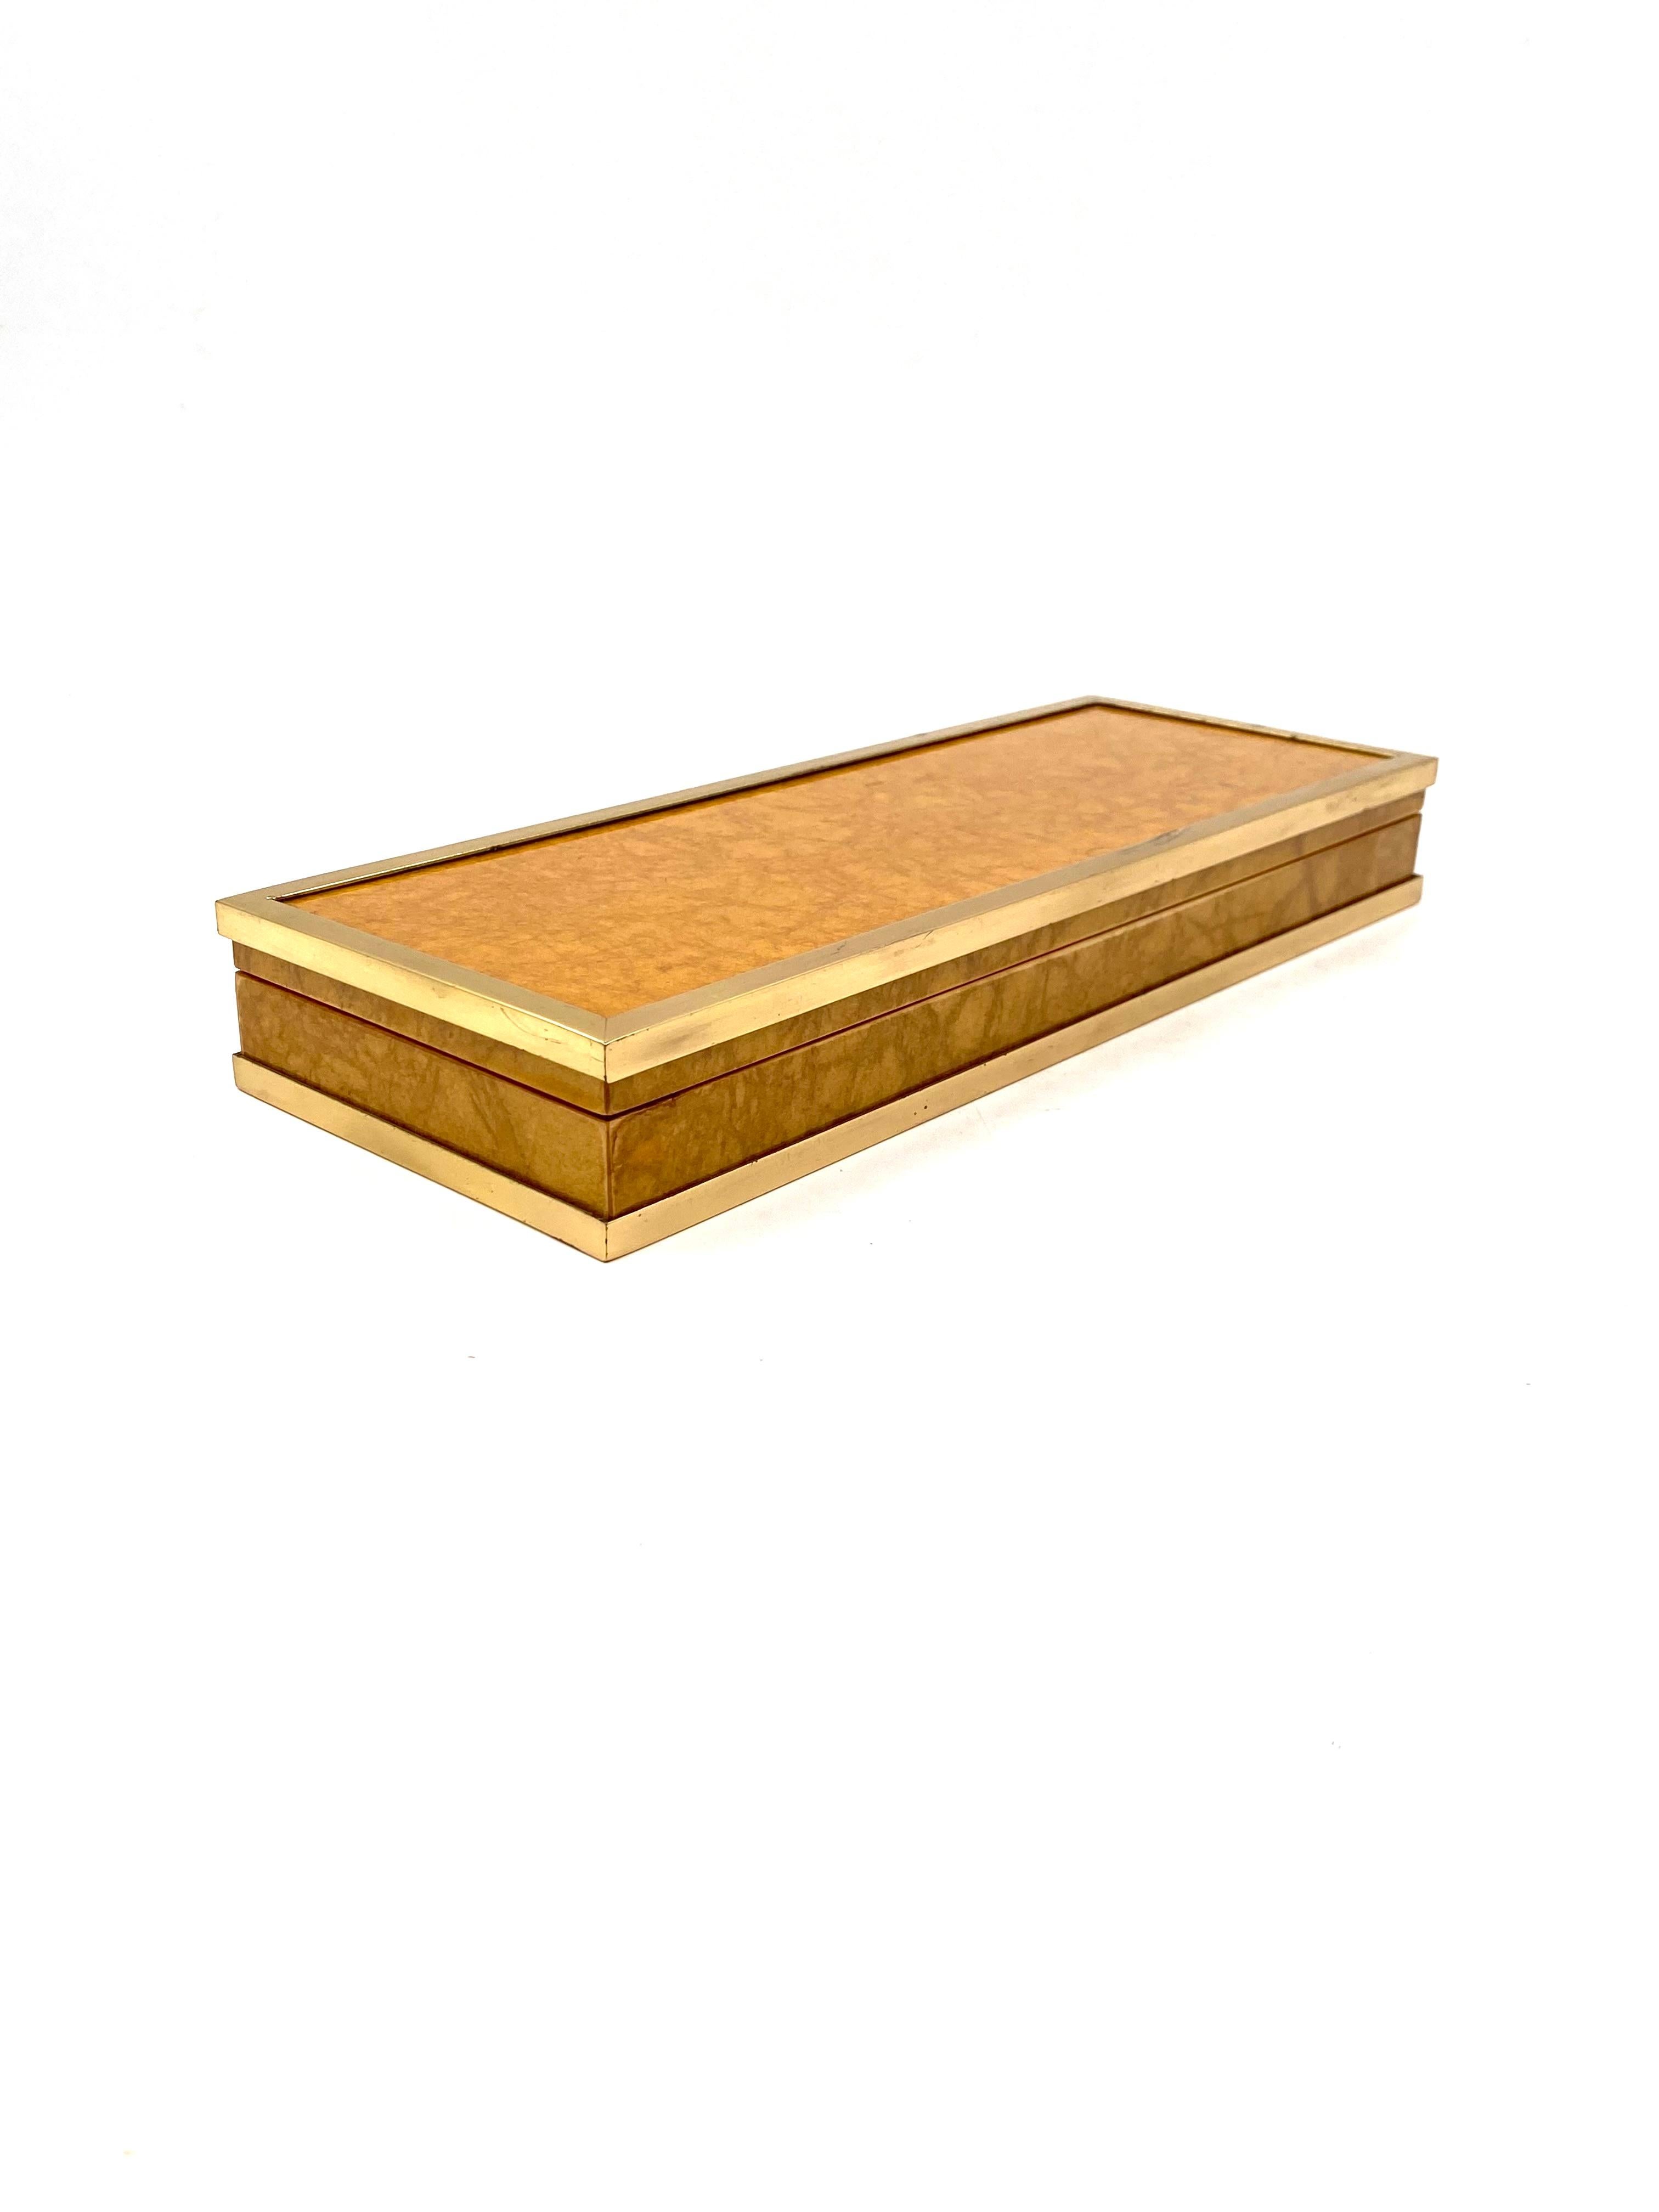 Tommaso Barbi, Wood and Brass Cigars Box, Italy, 1970 For Sale 2